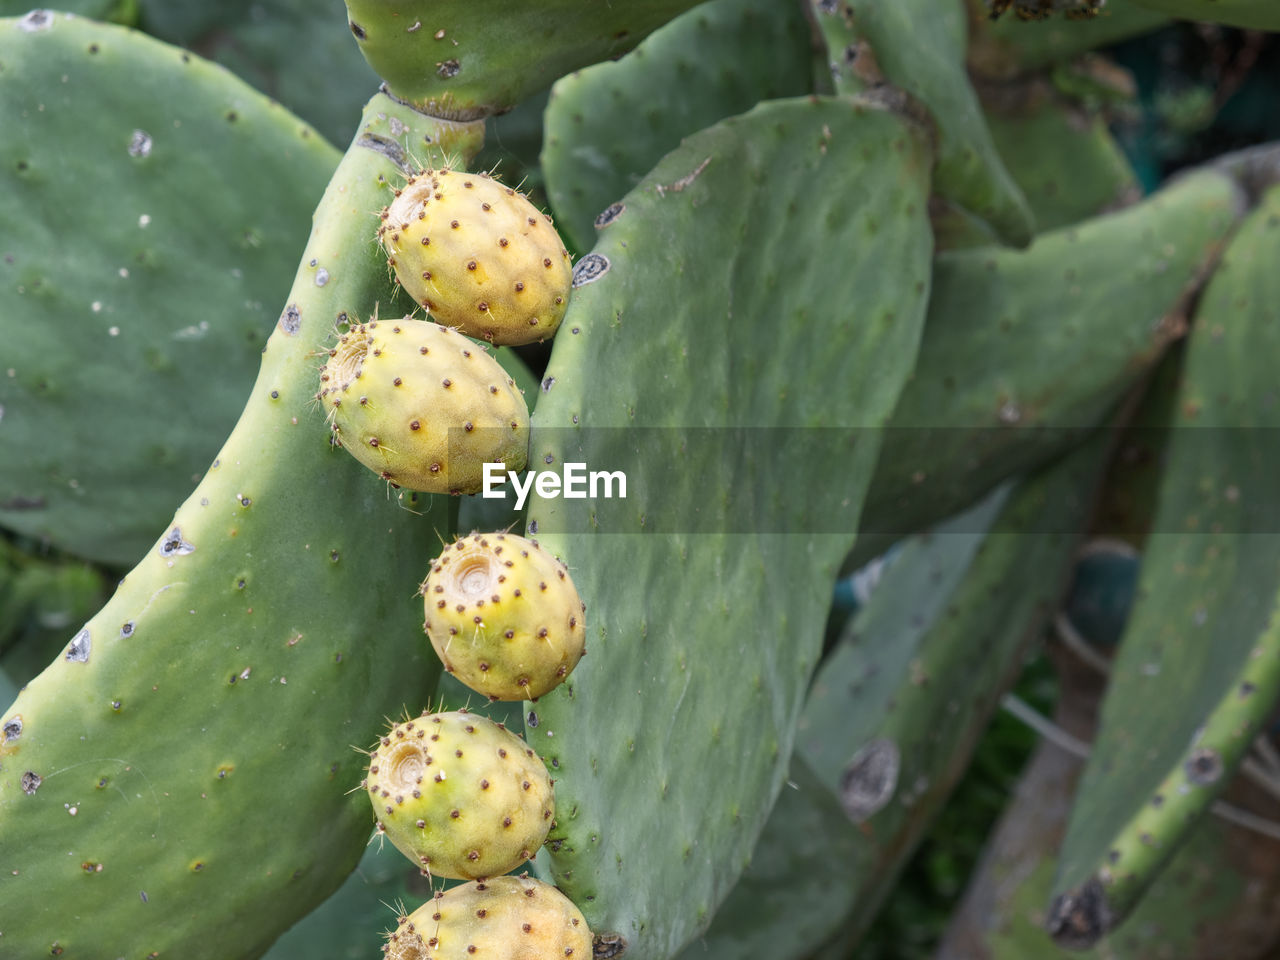 CLOSE-UP OF FRUITS GROWING ON CACTUS IN GARDEN